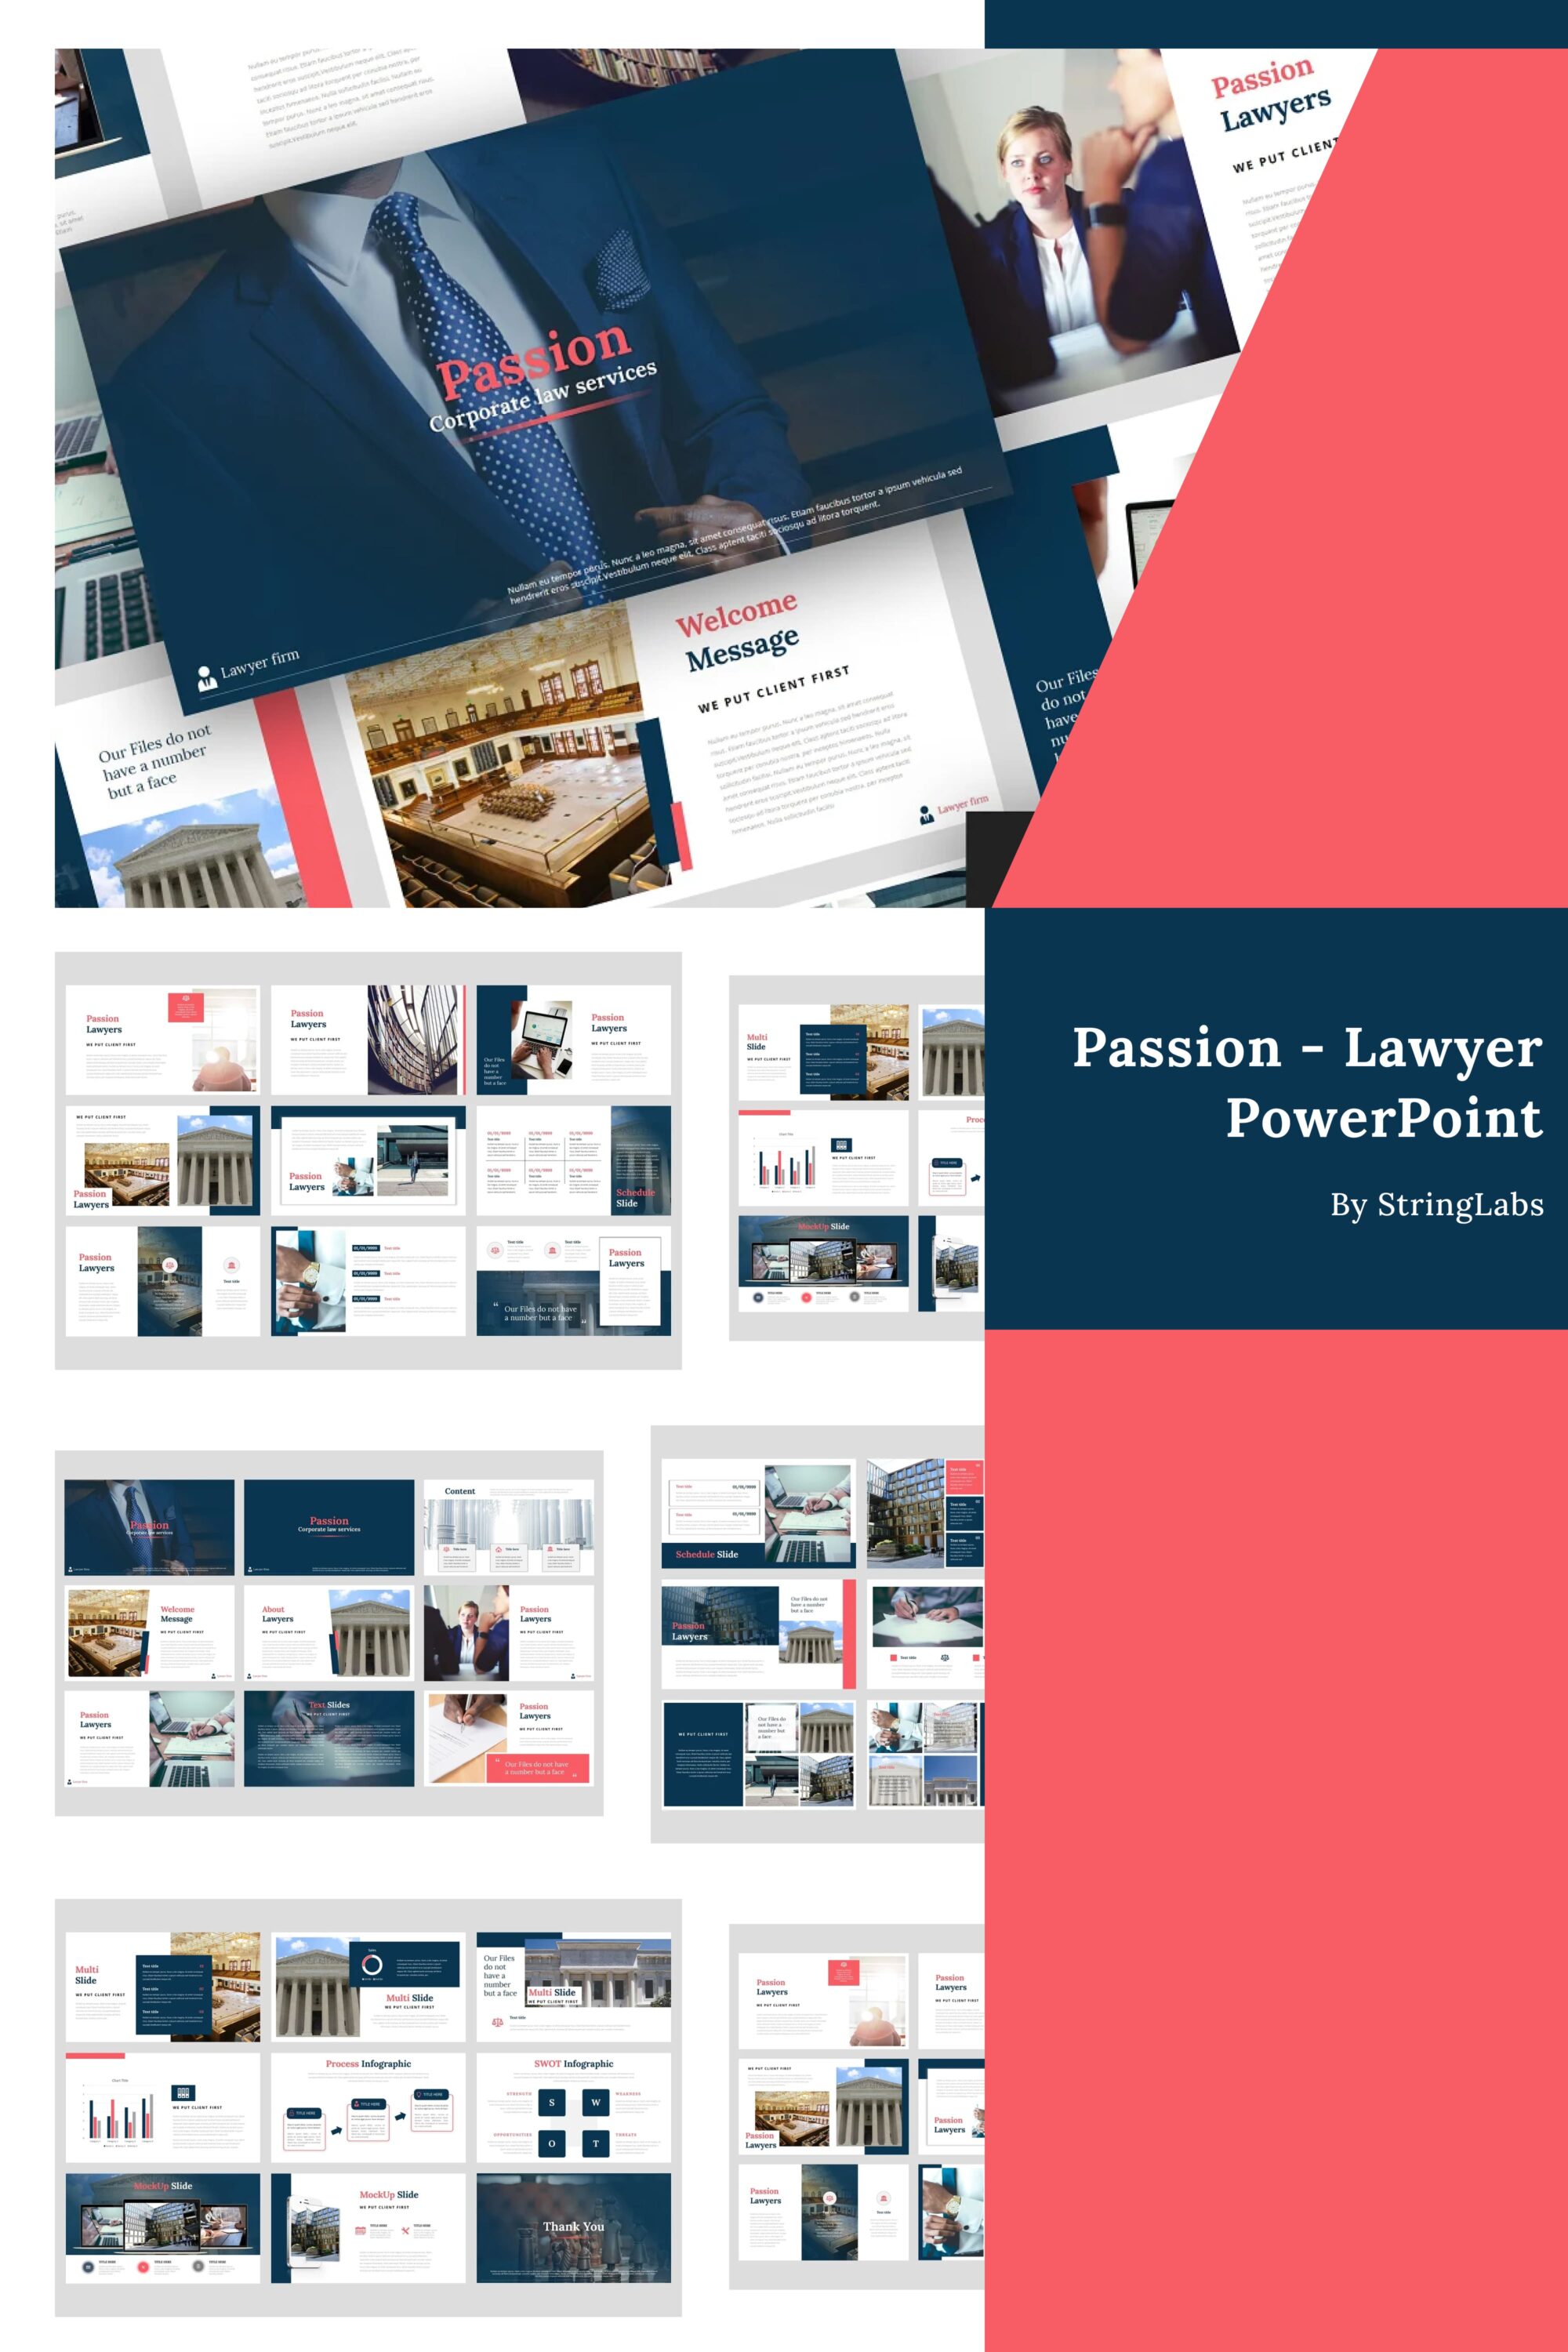 Passion Lawyer Powerpoint 06.